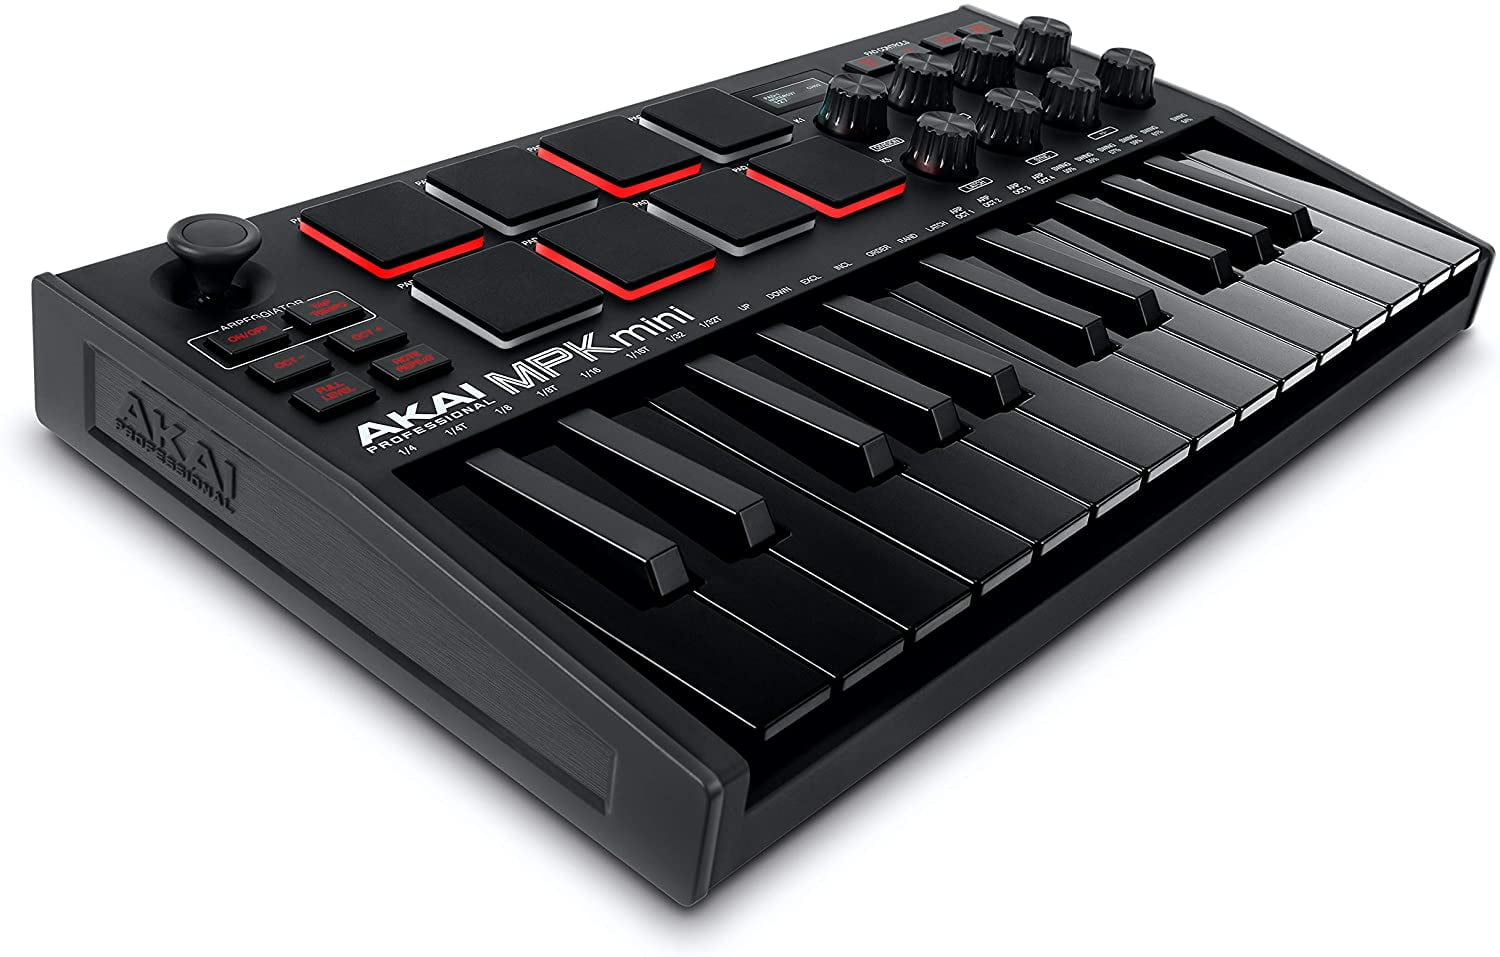 AKAI Professional MPK Mini MK3 25 Key USB MIDI Keyboard Controller with 8  Backlit Drum Pads, 8 Knobs and Music Production Software, Black